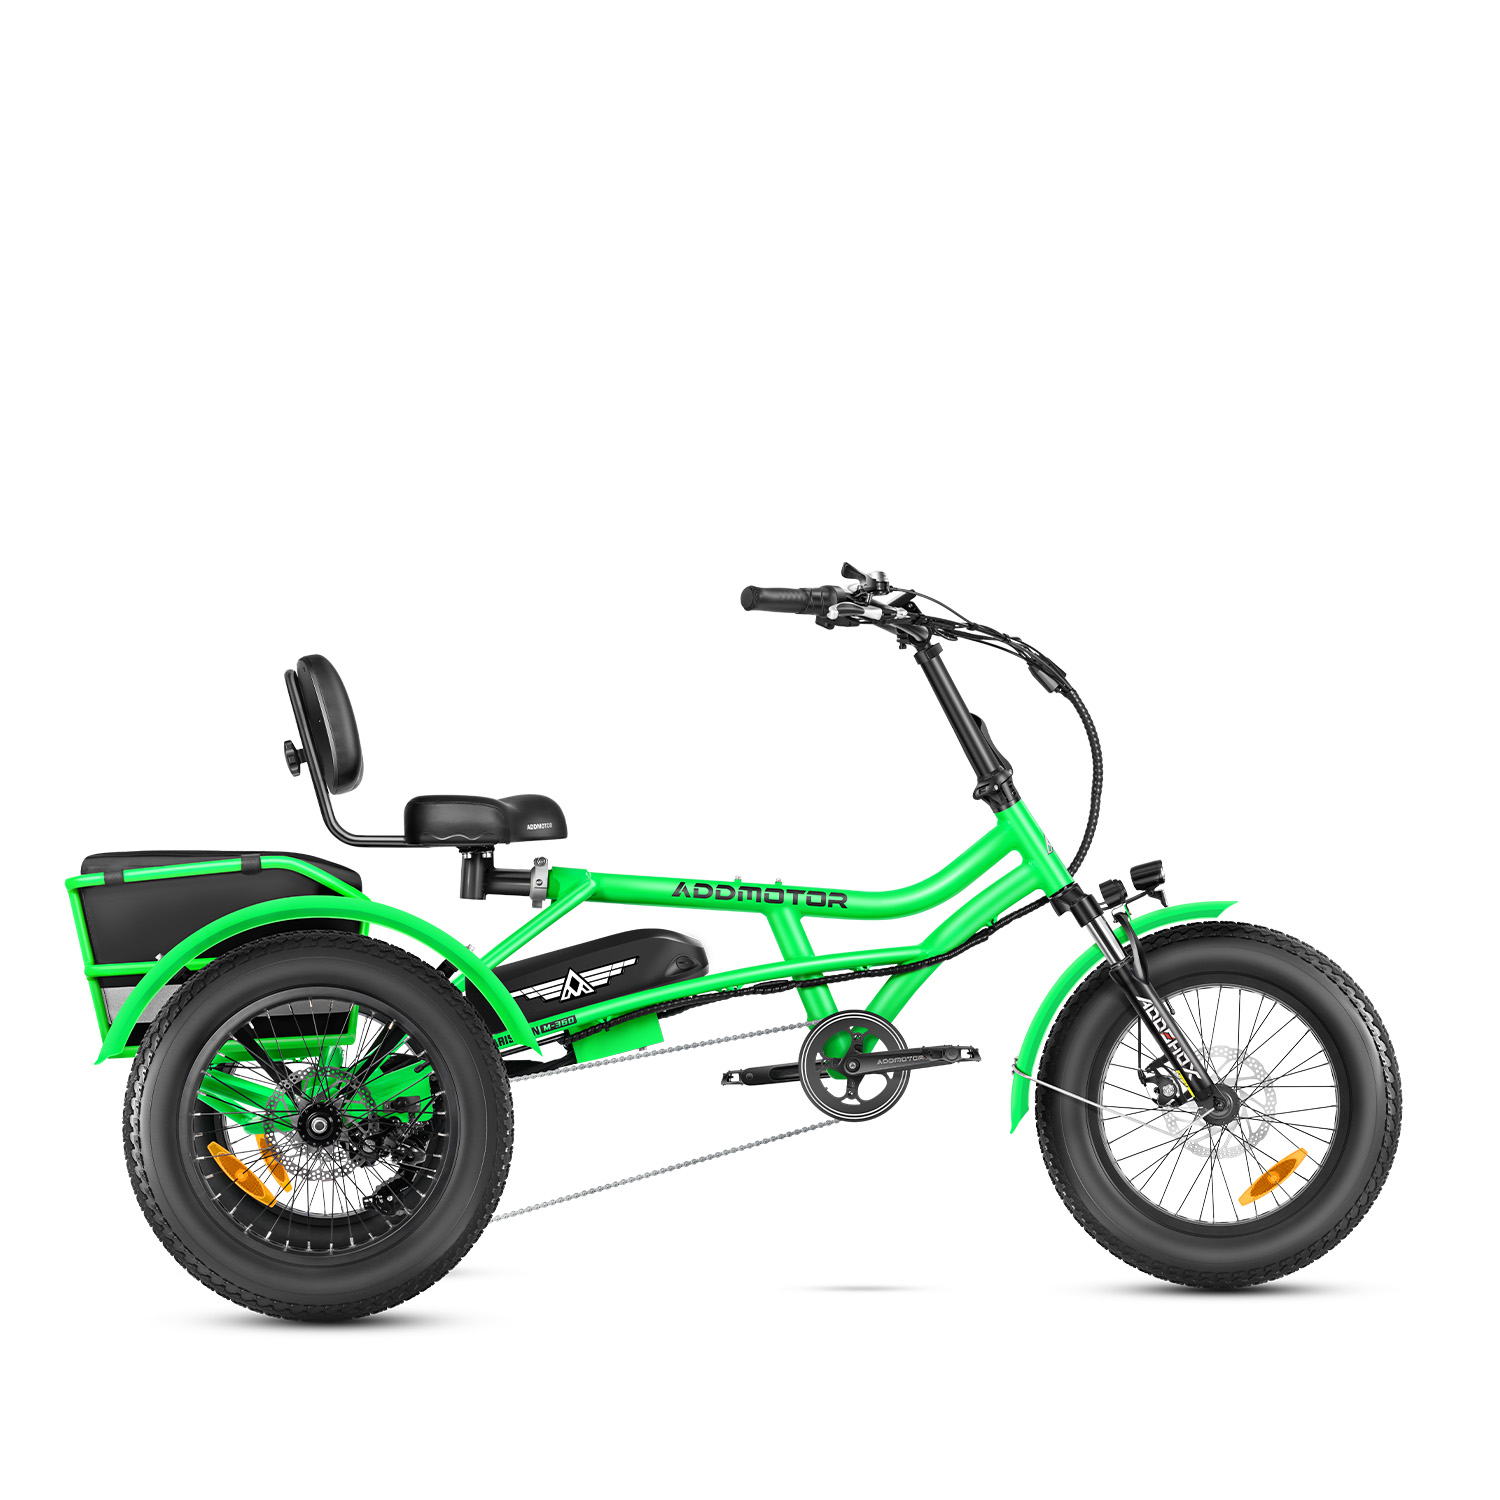 Addmotor Arisetan M-360 Mini Trike | Adult Semi-recumbent Electric Trike | Best Affordable Electric Tricycle with 750W Rear Motor | Green